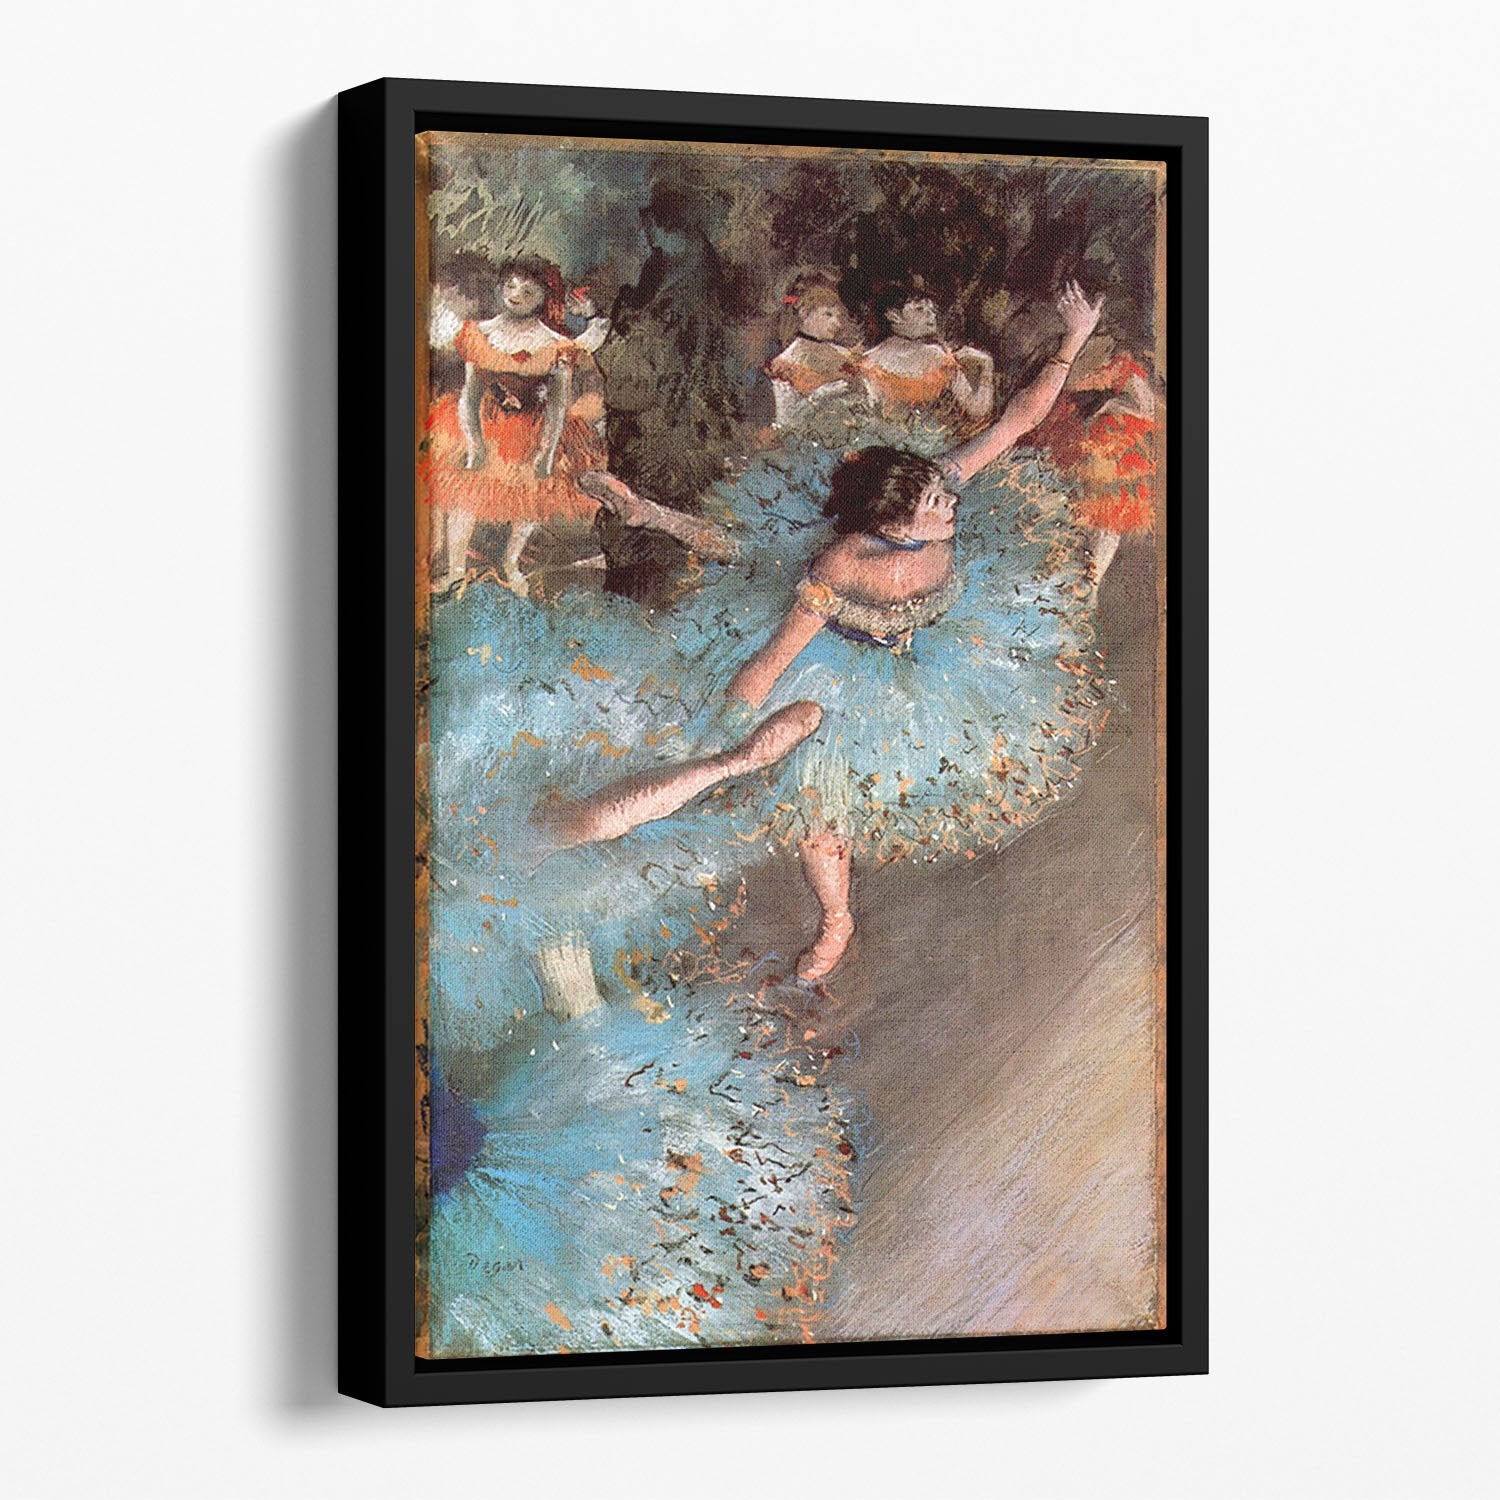 The Greens dancers by Degas Floating Framed Canvas